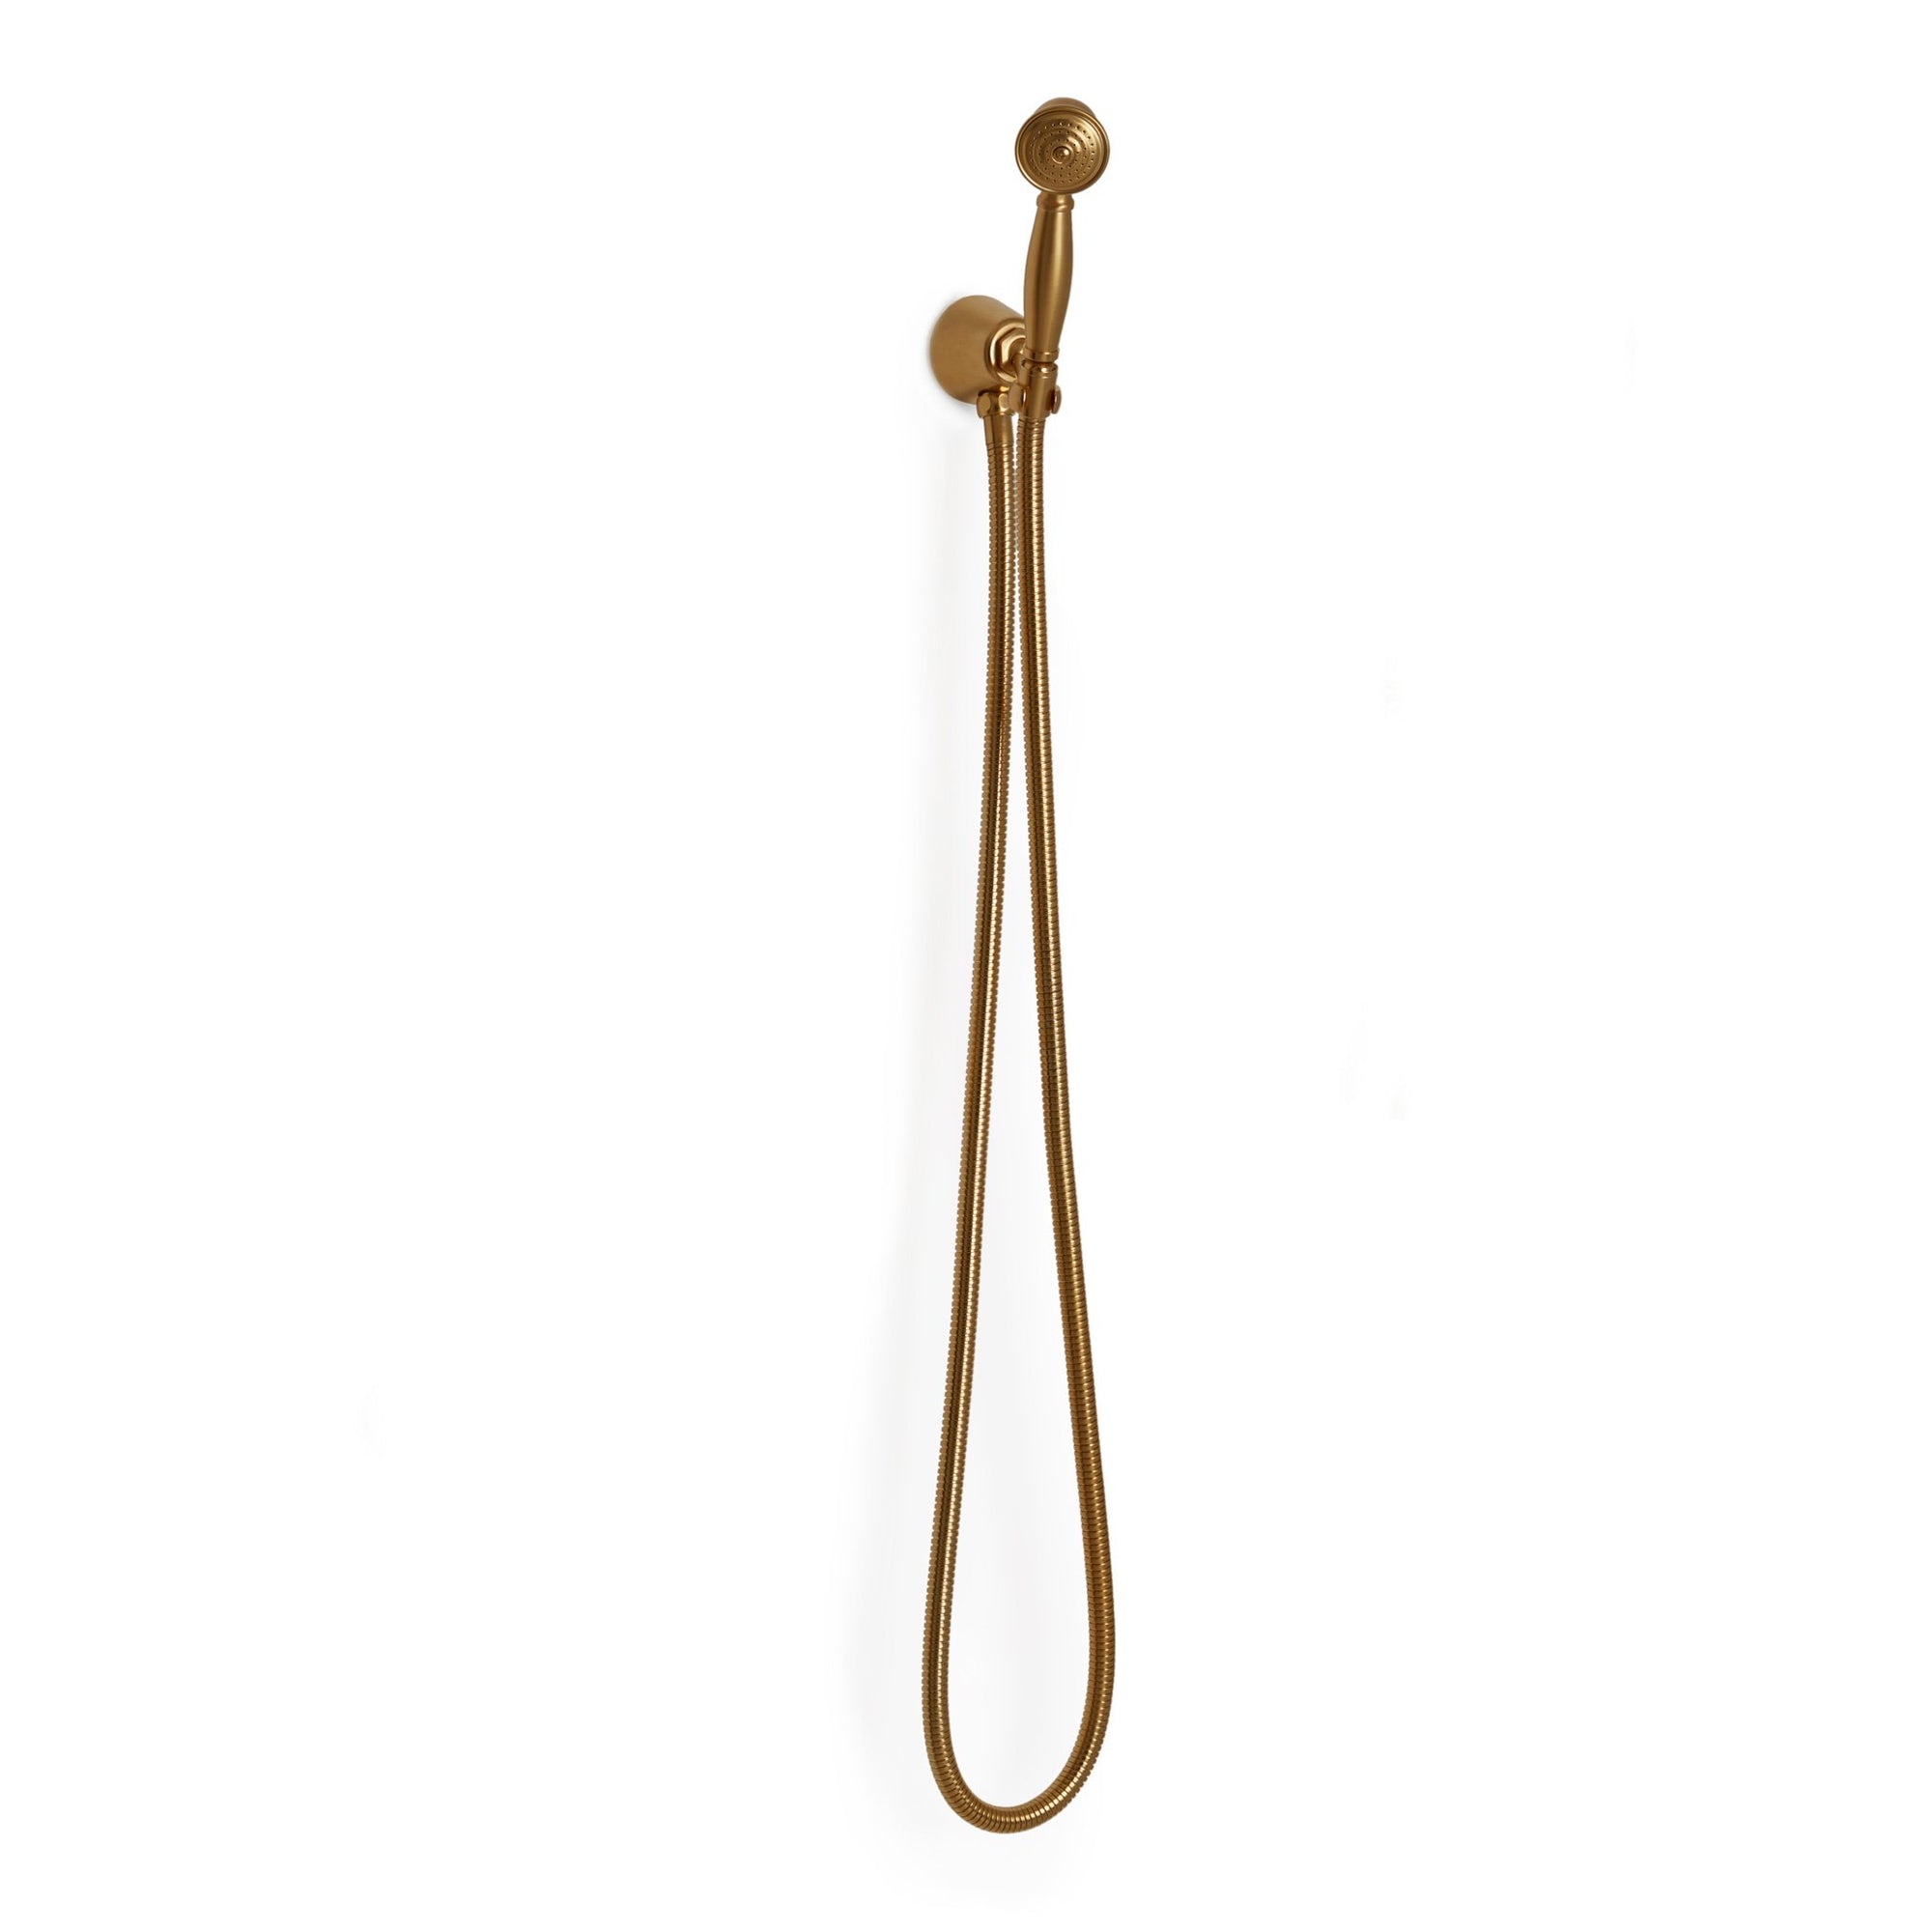 0836WLMT-GP Sherle Wagner International Classical Hand Shower Wall Mount in Gold Plate metal finish